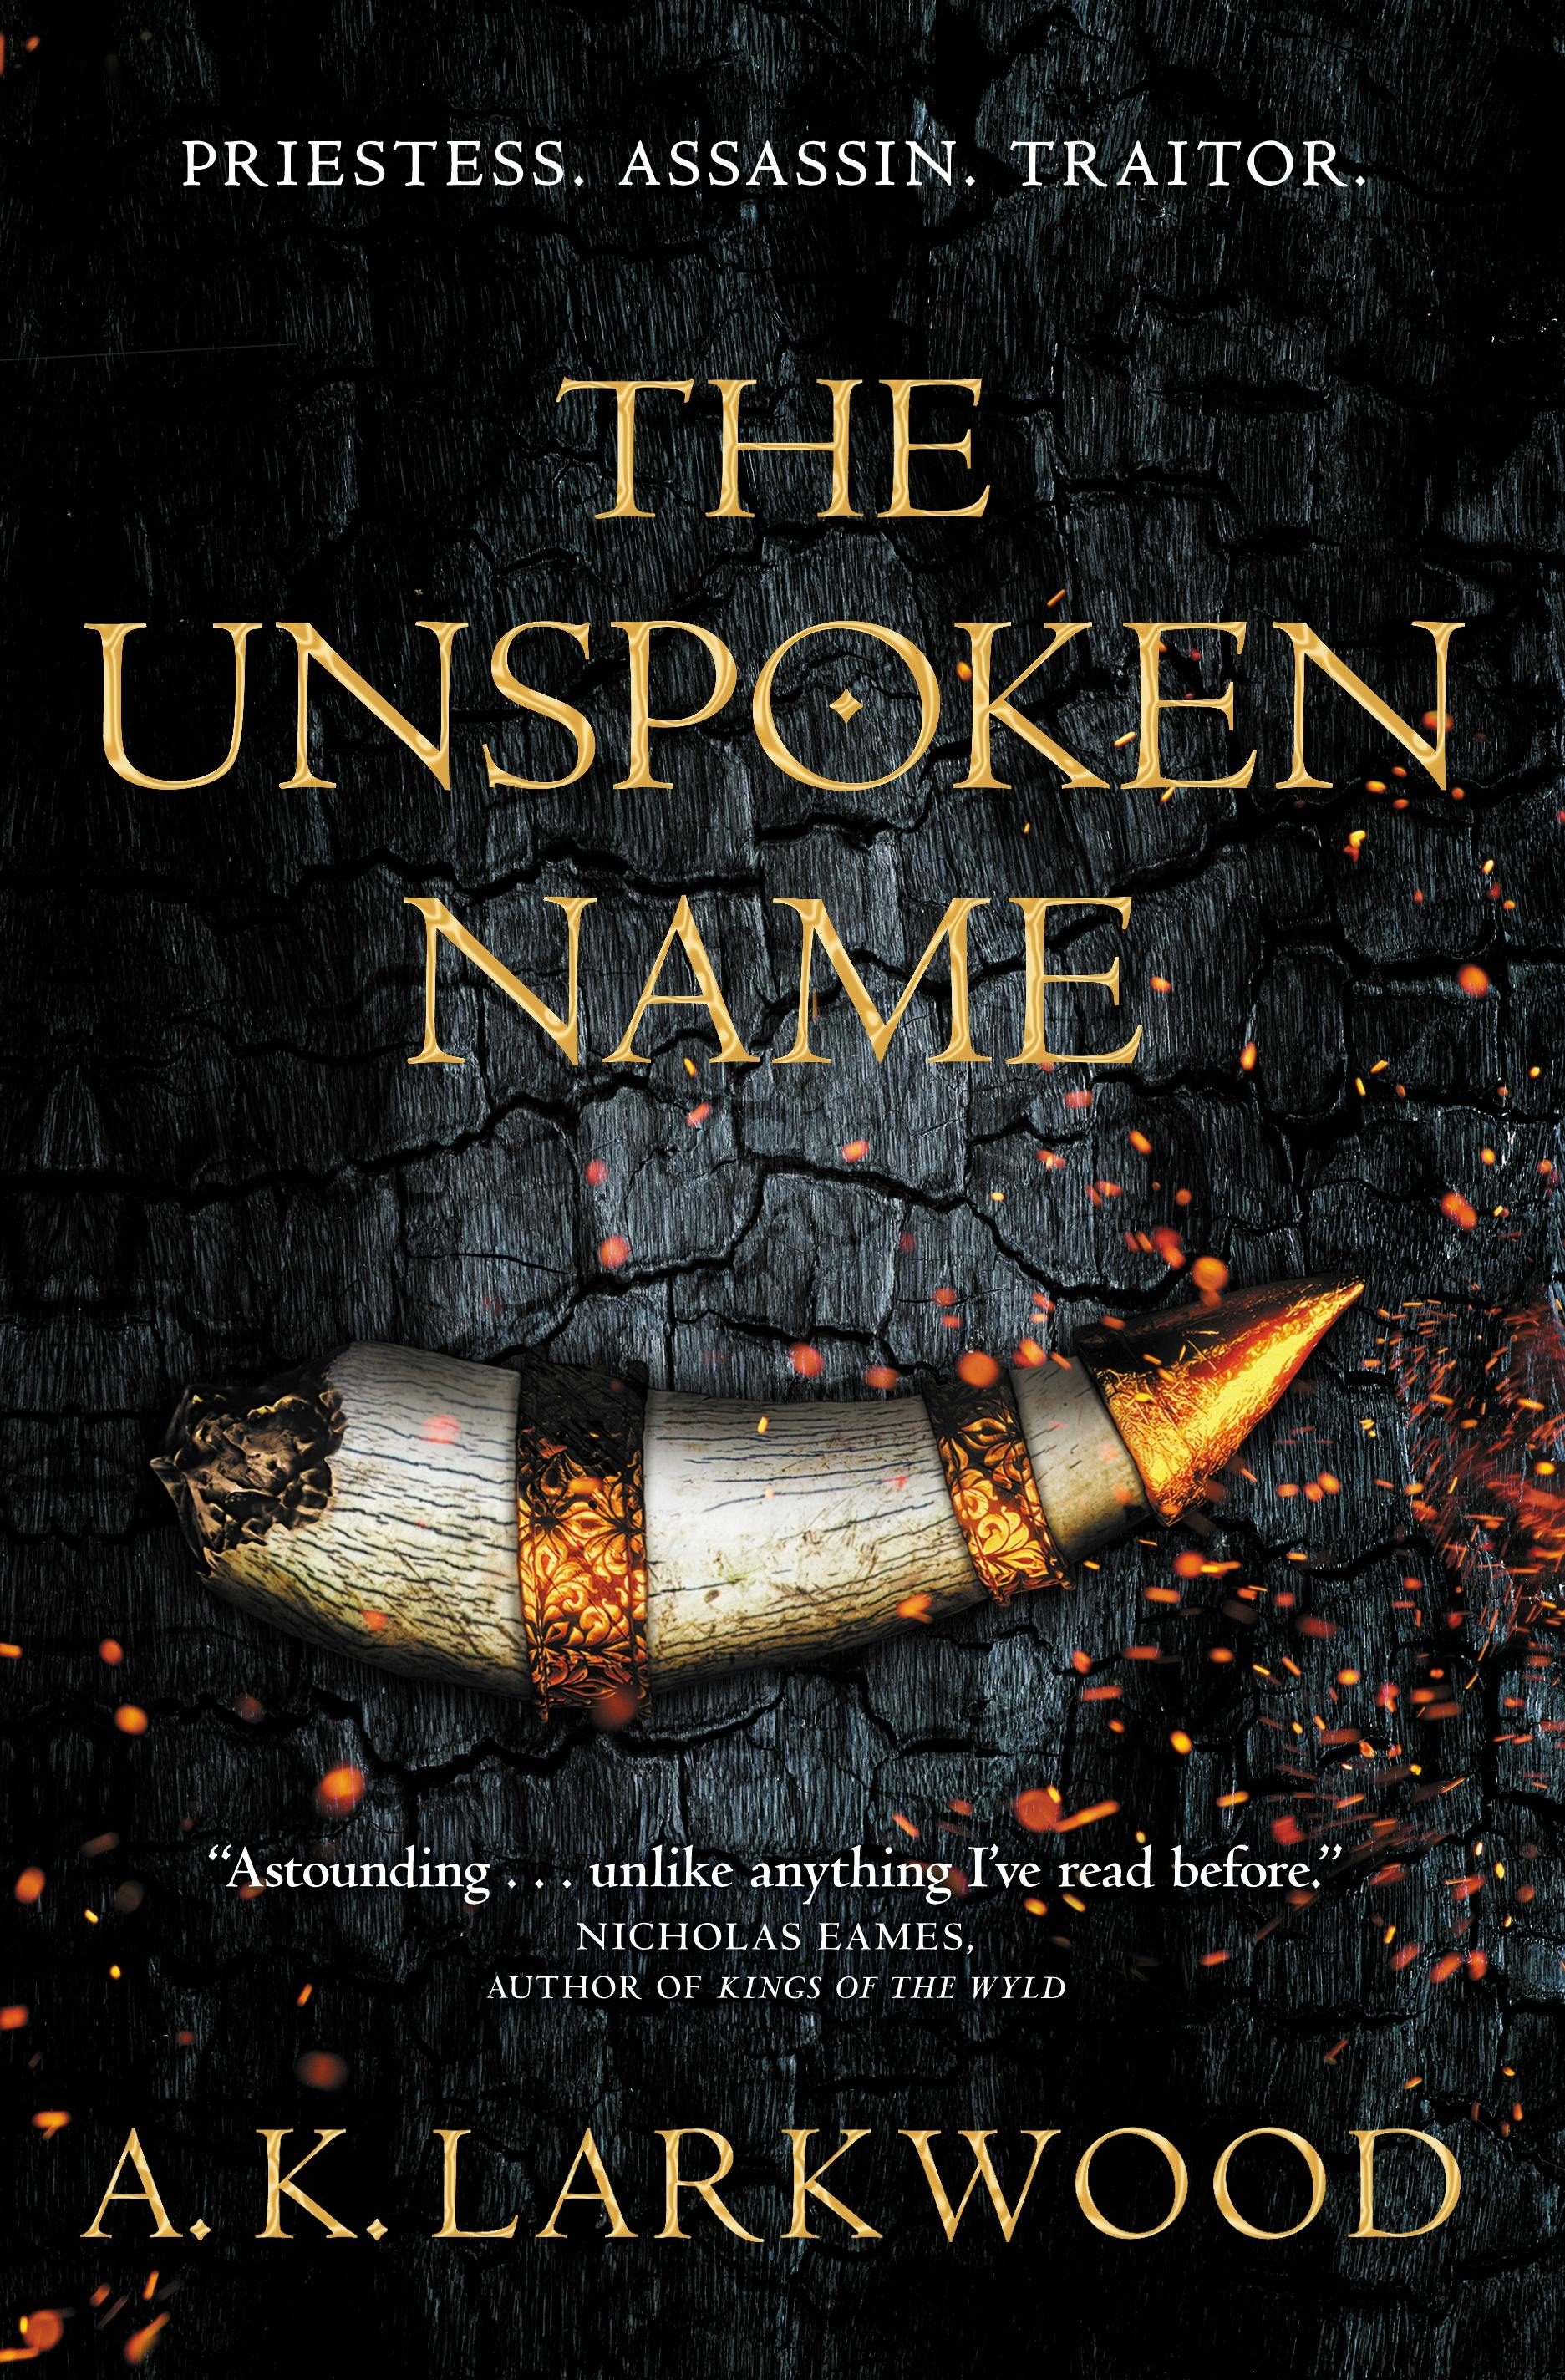 Cover for the book titled as: The Unspoken Name